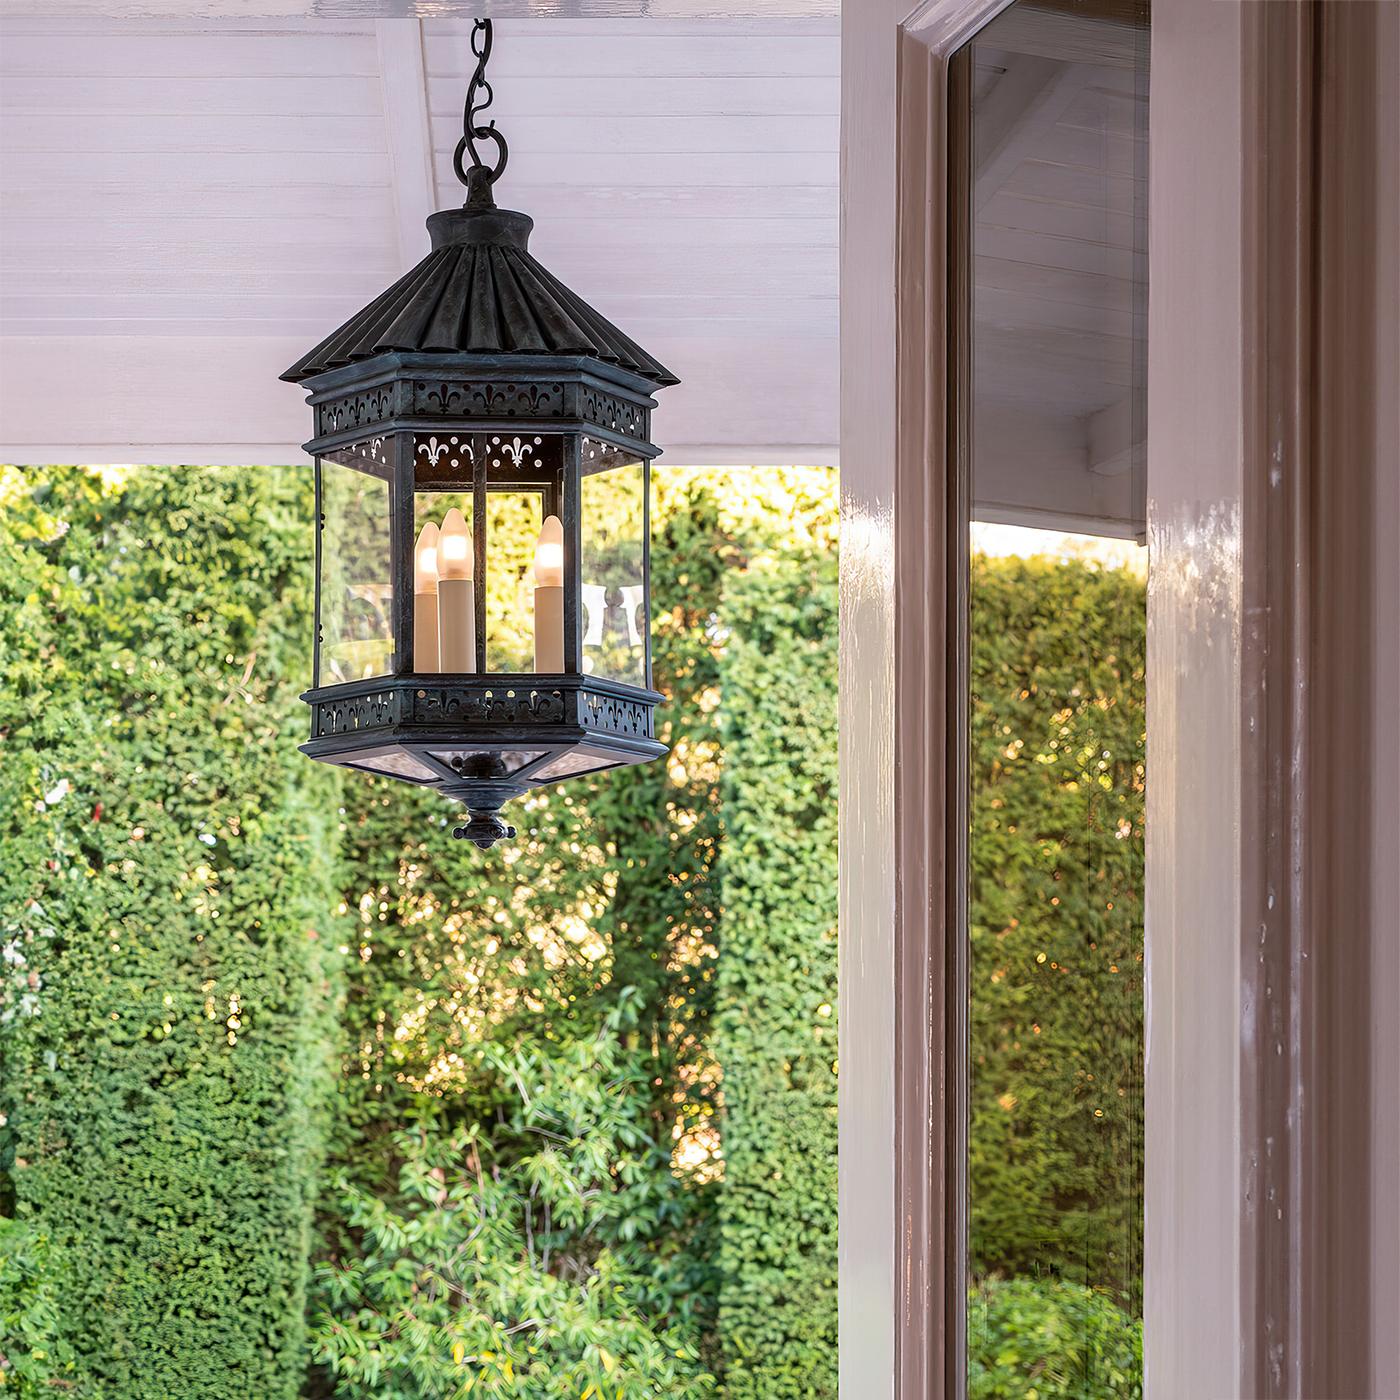 French Country Lantern, This hexagonal lantern has a fluted lotus roof, fleur de lis reticulated panel sides, glass sides and door with three lights.

The verdigris bronze finish adds to the elegance of the lantern. UL Listed for wet locations.